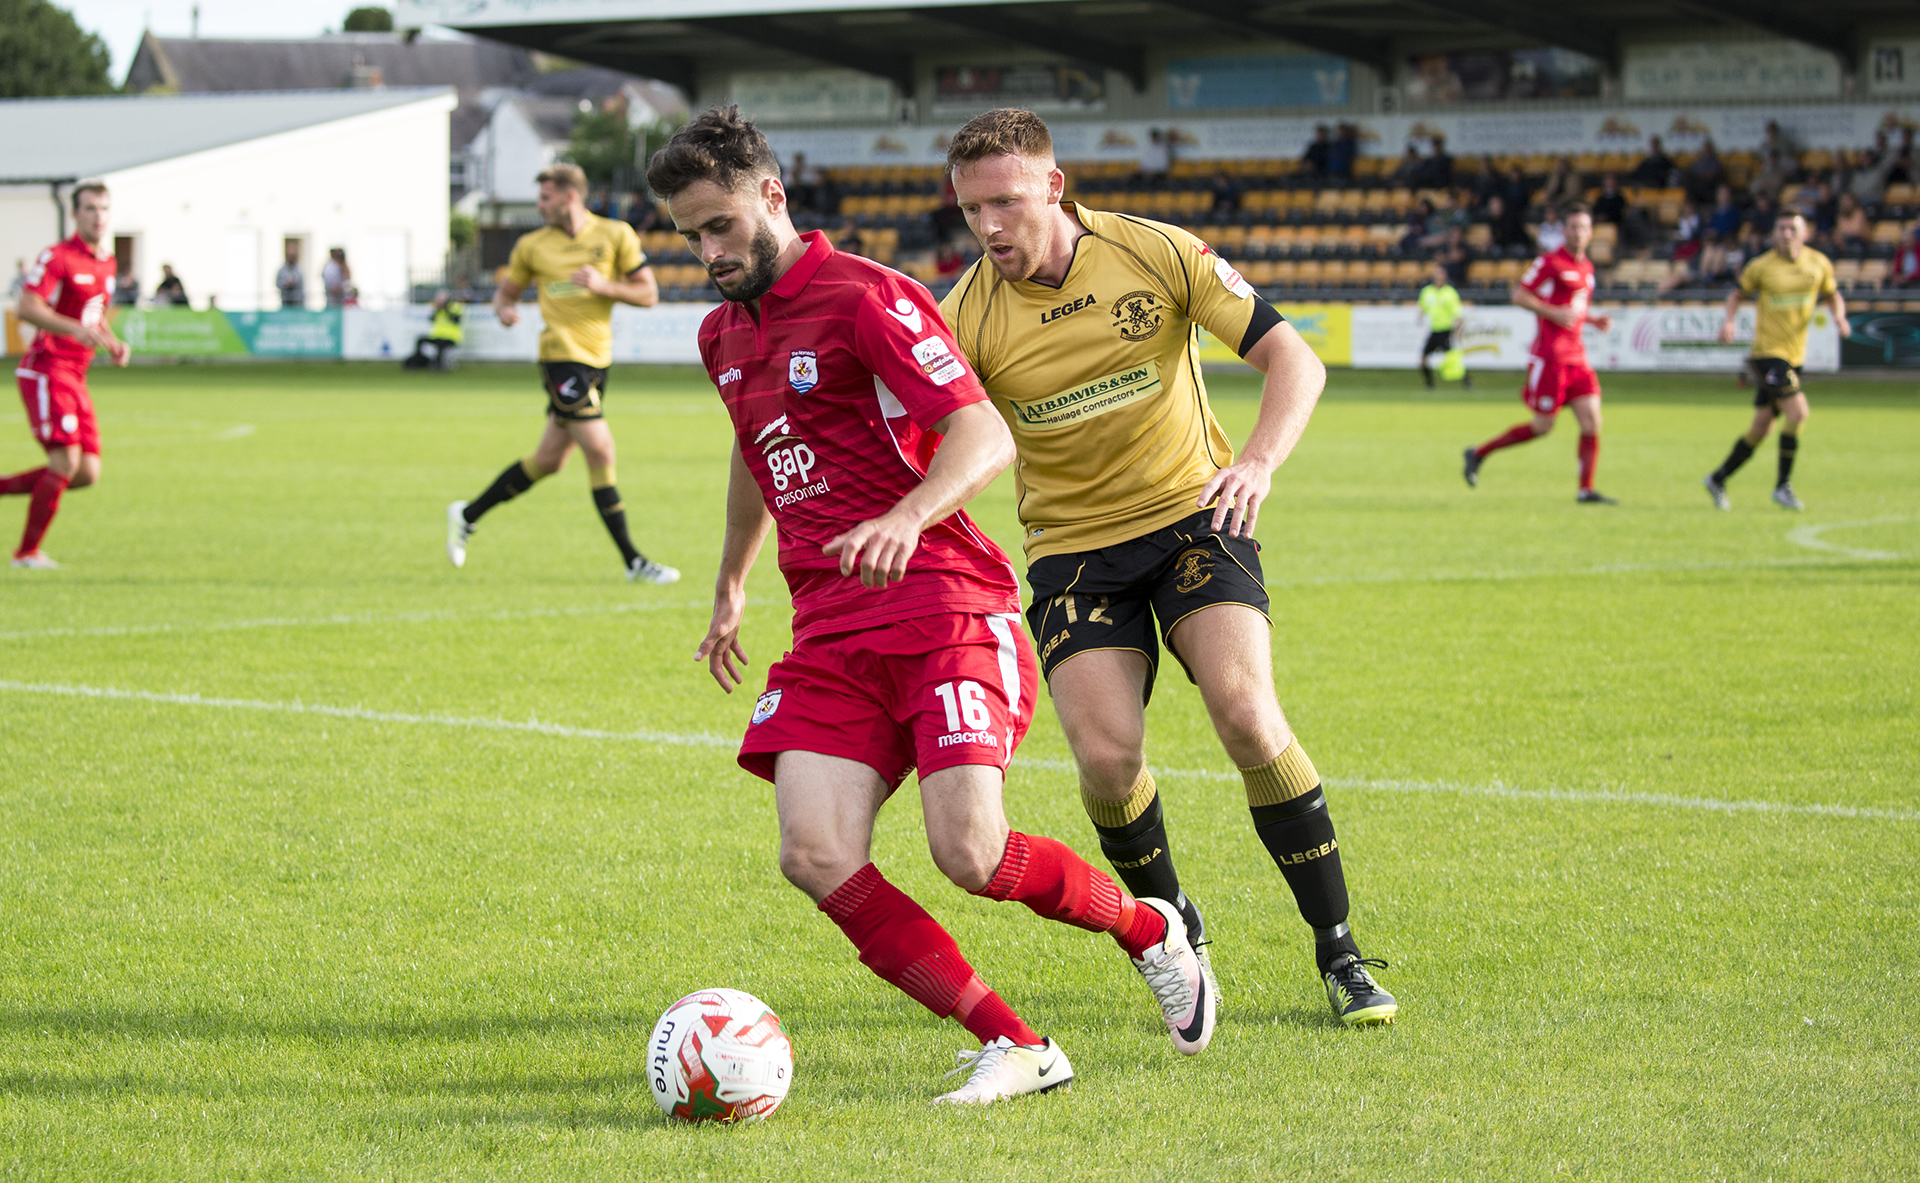 Nathan Woolfe on the attack for The Nomads - © - NCM Media